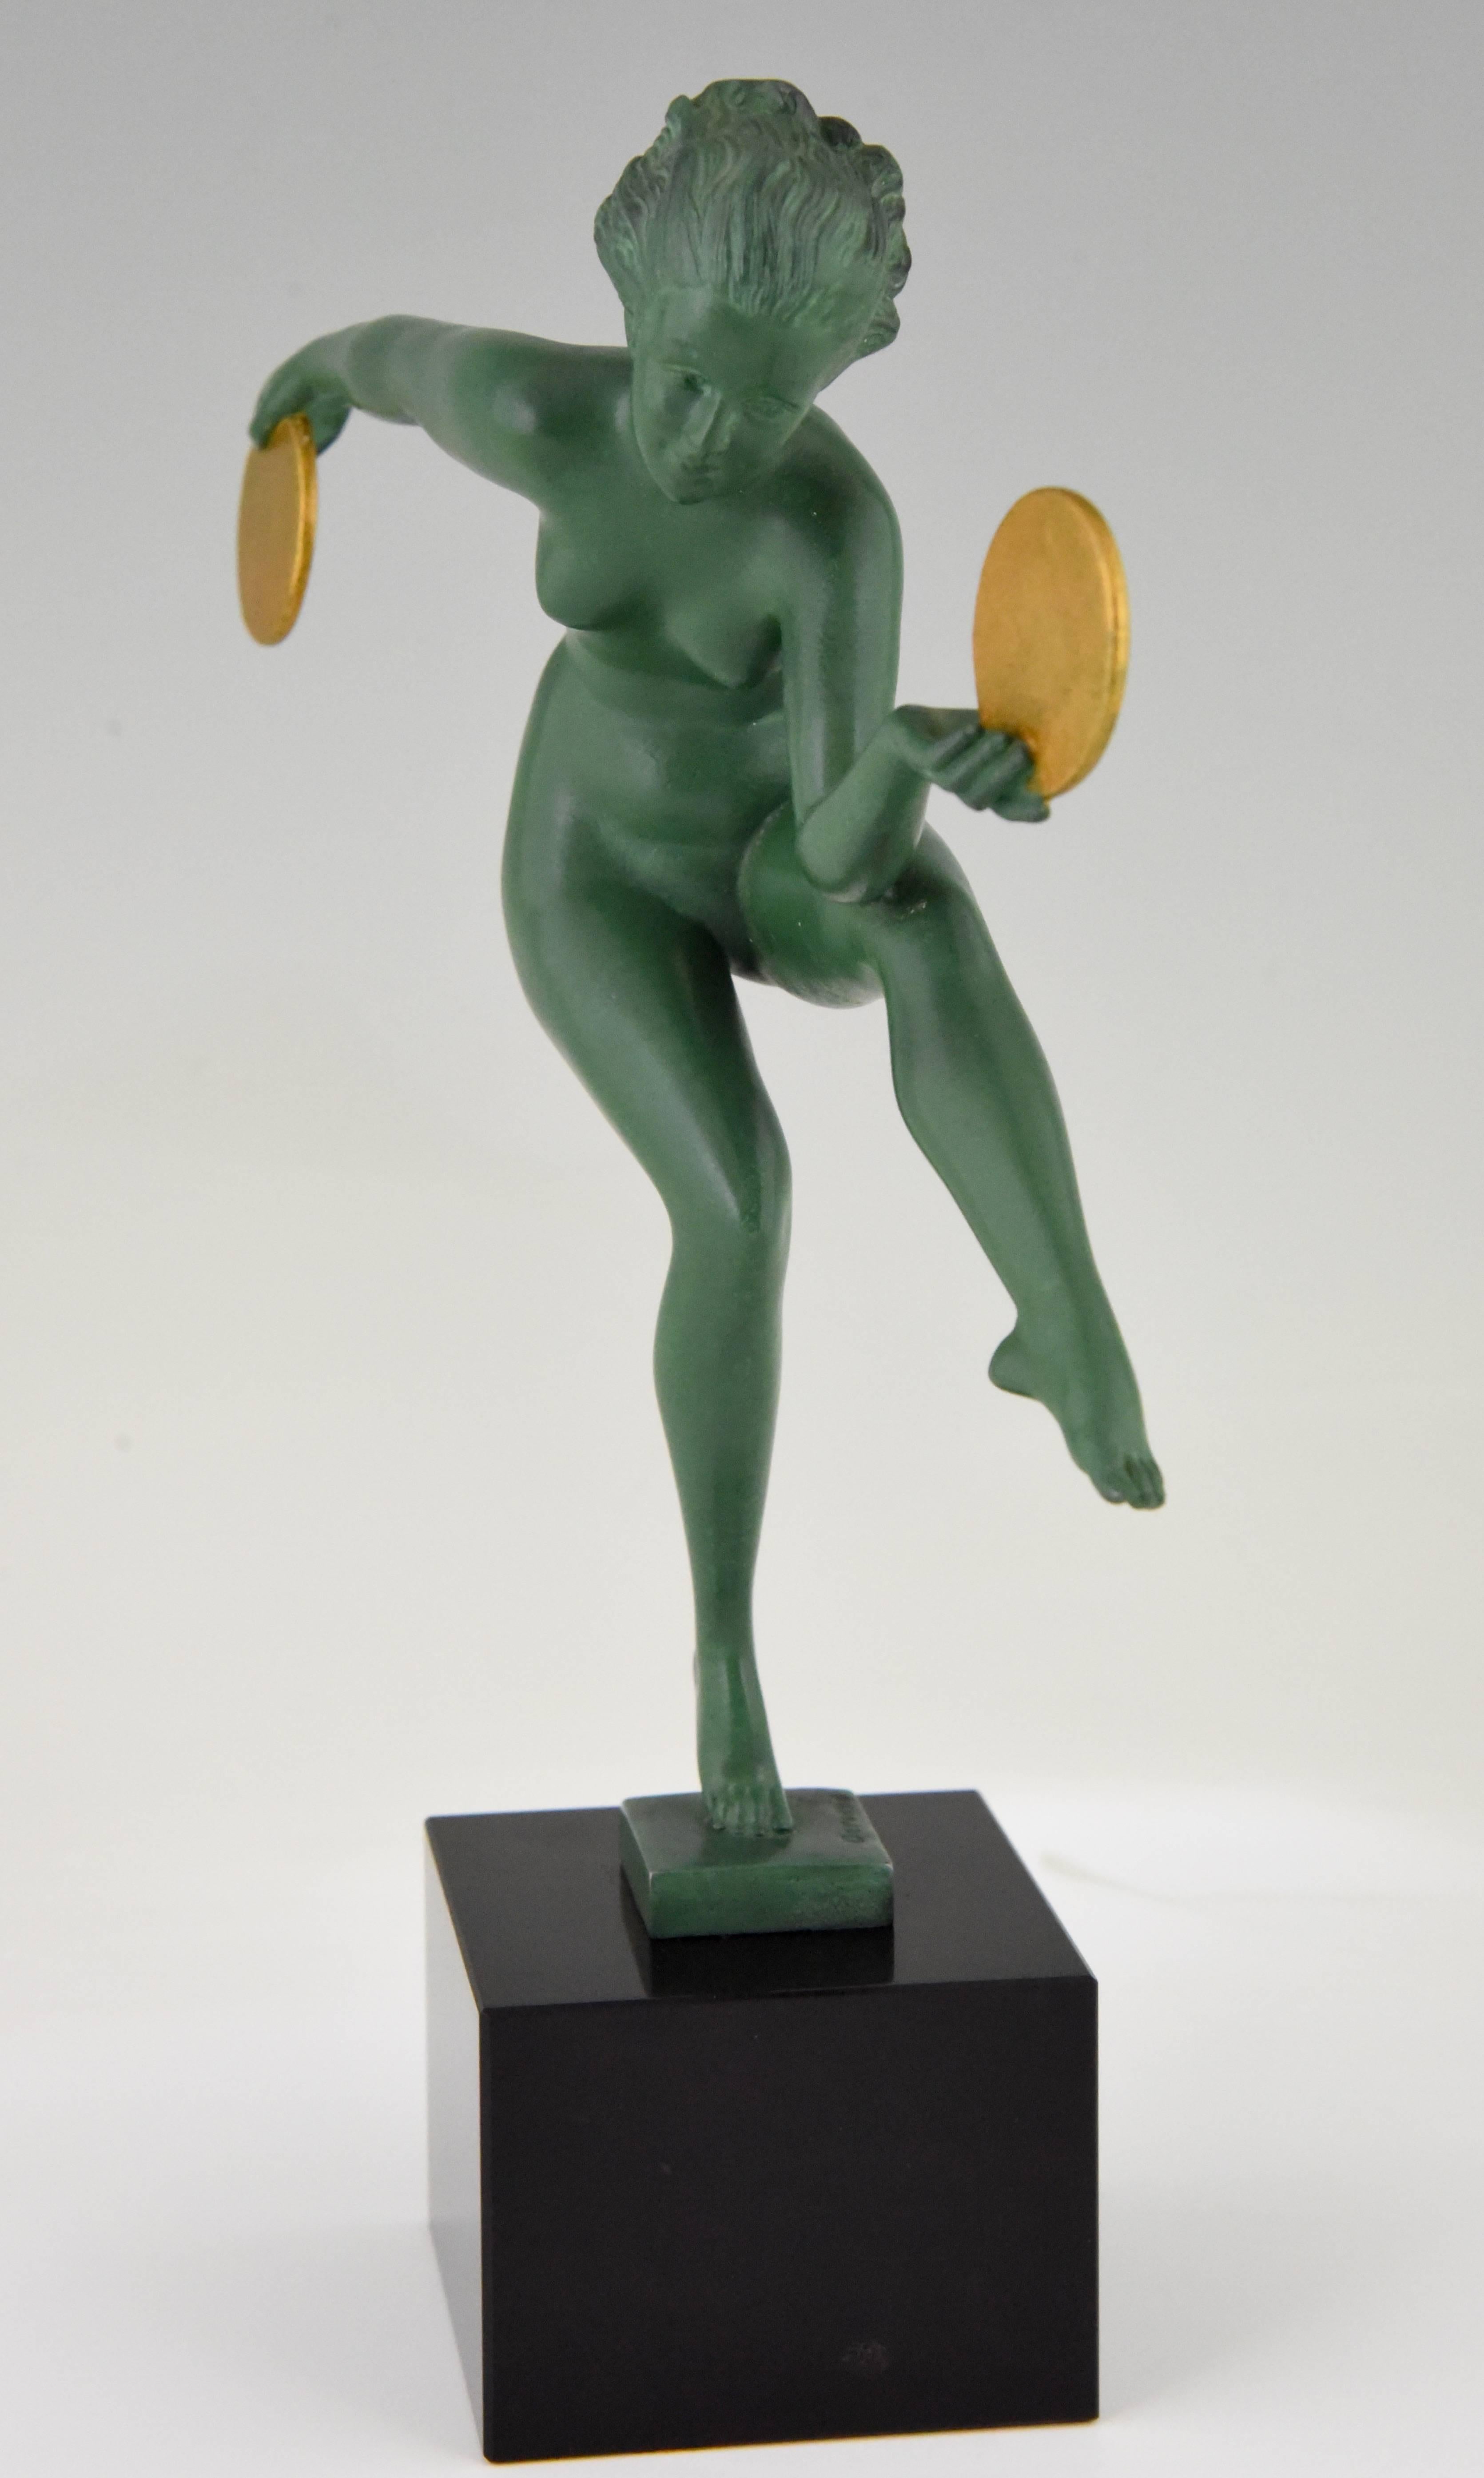 French Art Deco Sculpture Nude Dancer with Discs by Marcel Bouraine, Derenne, 1930